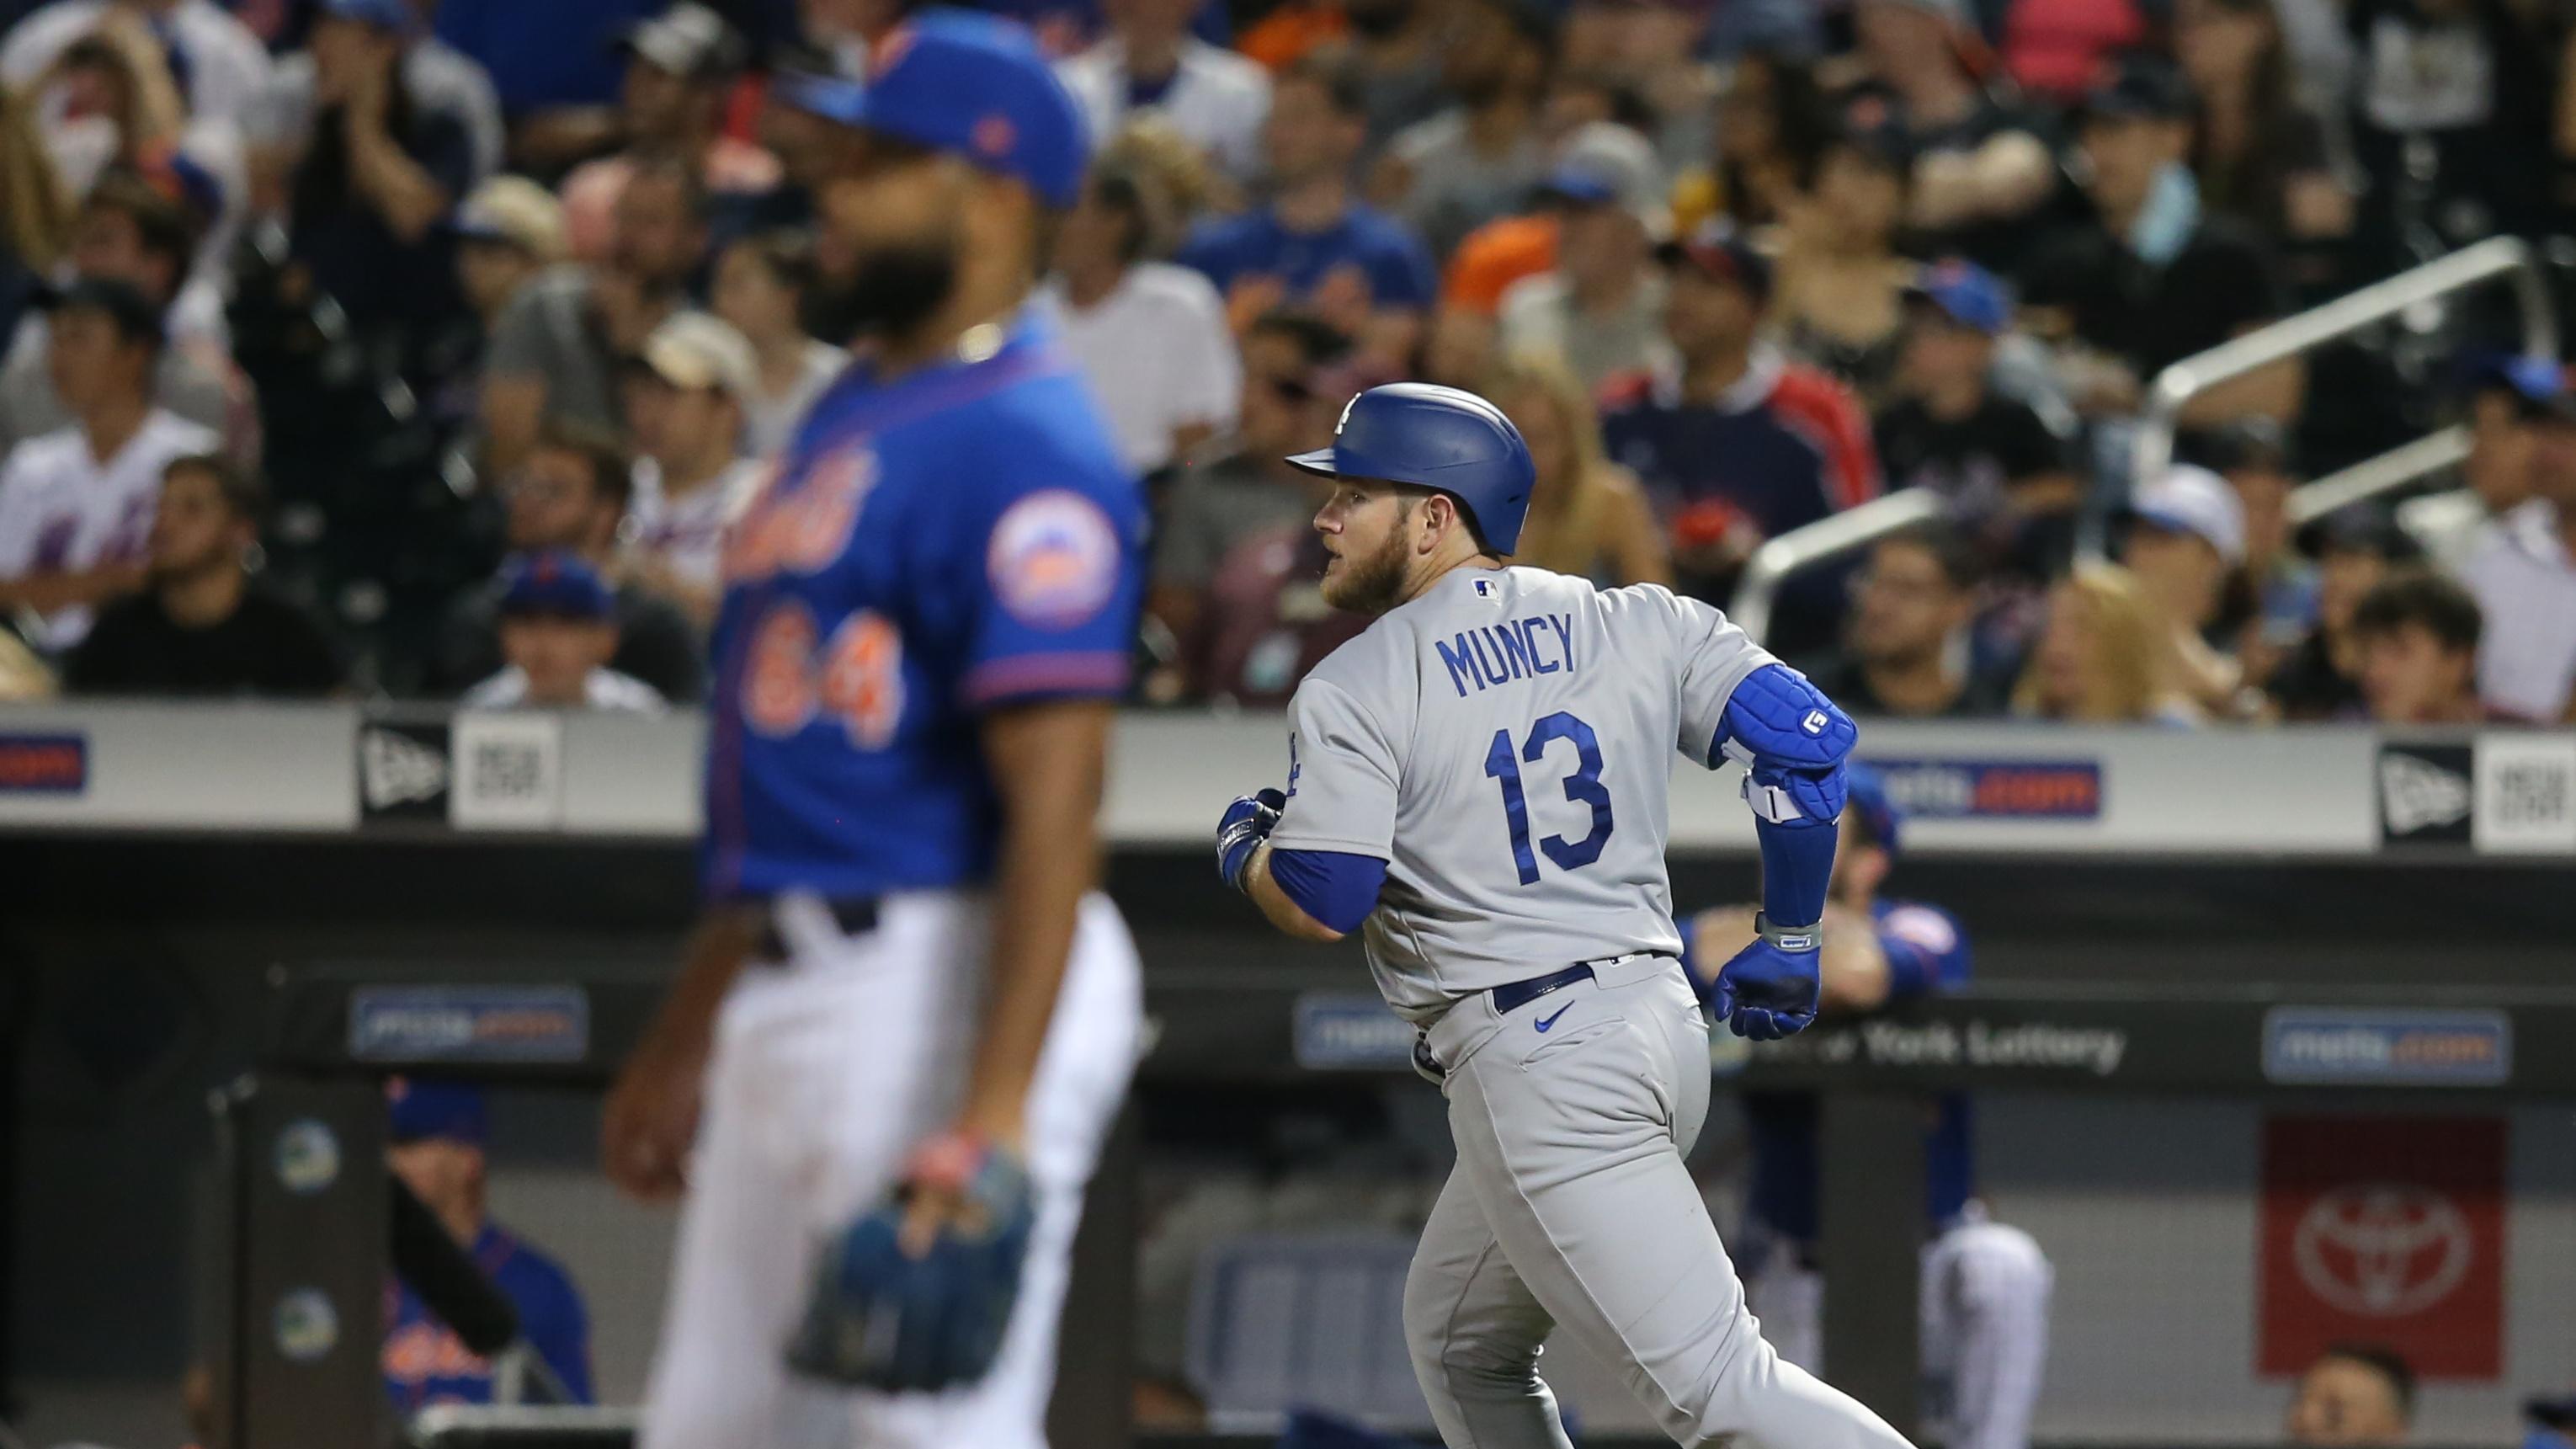 Aug 15, 2021; New York City, New York, USA; Los Angeles Dodgers first baseman Max Muncy (13) rounds the bases after hitting a two run home run against New York Mets relief pitcher Yennsy Diaz (64) during the sixth inning at Citi Field. / © Brad Penner-USA TODAY Sports